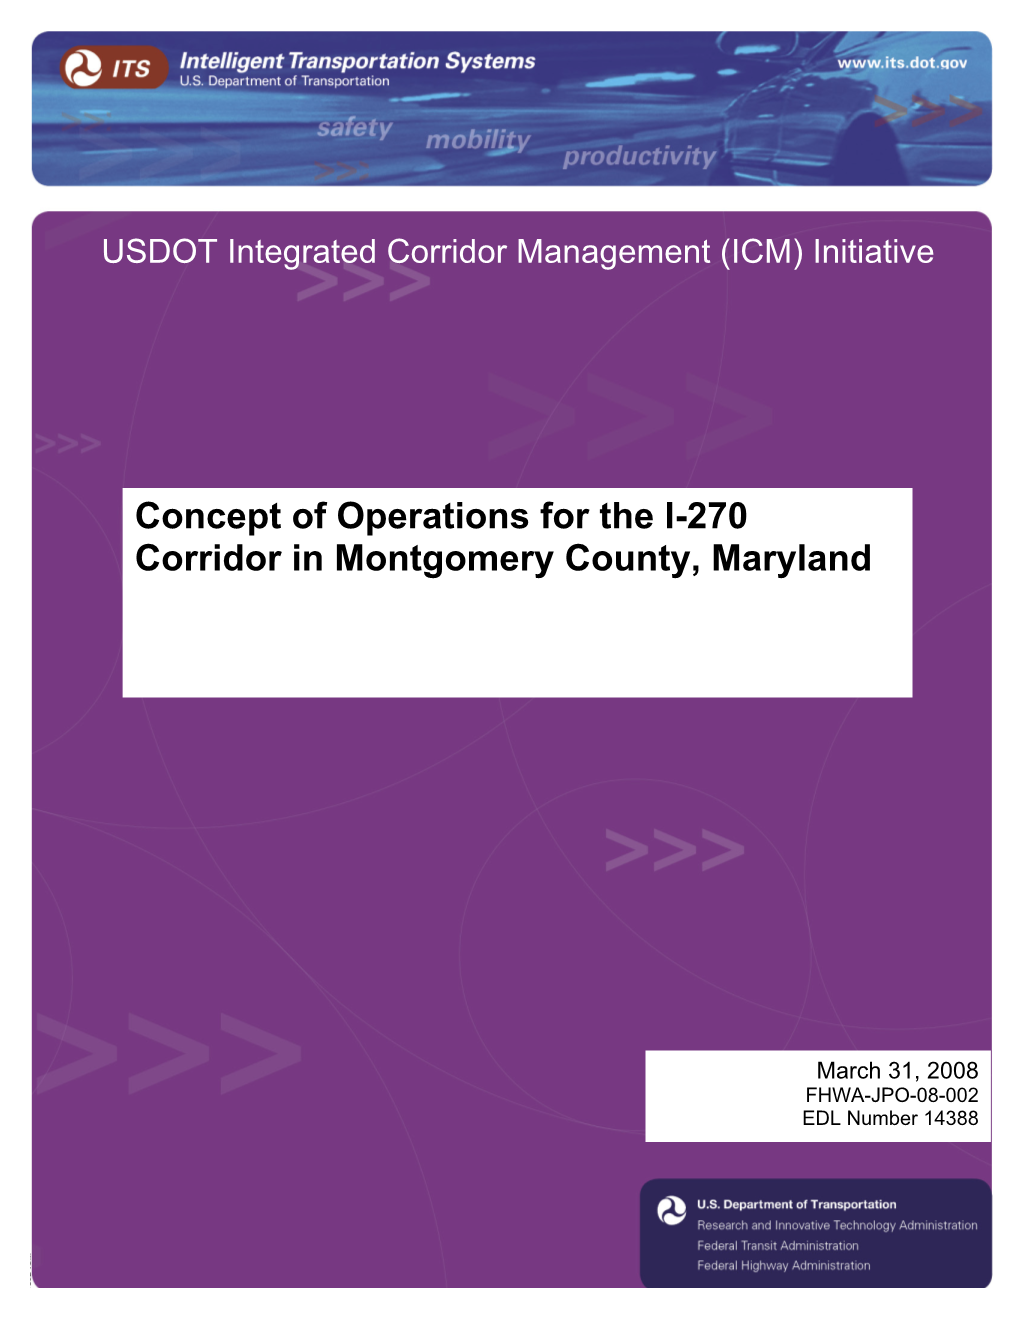 Concept of Operations for the I-270 Corridor in Montgomery County